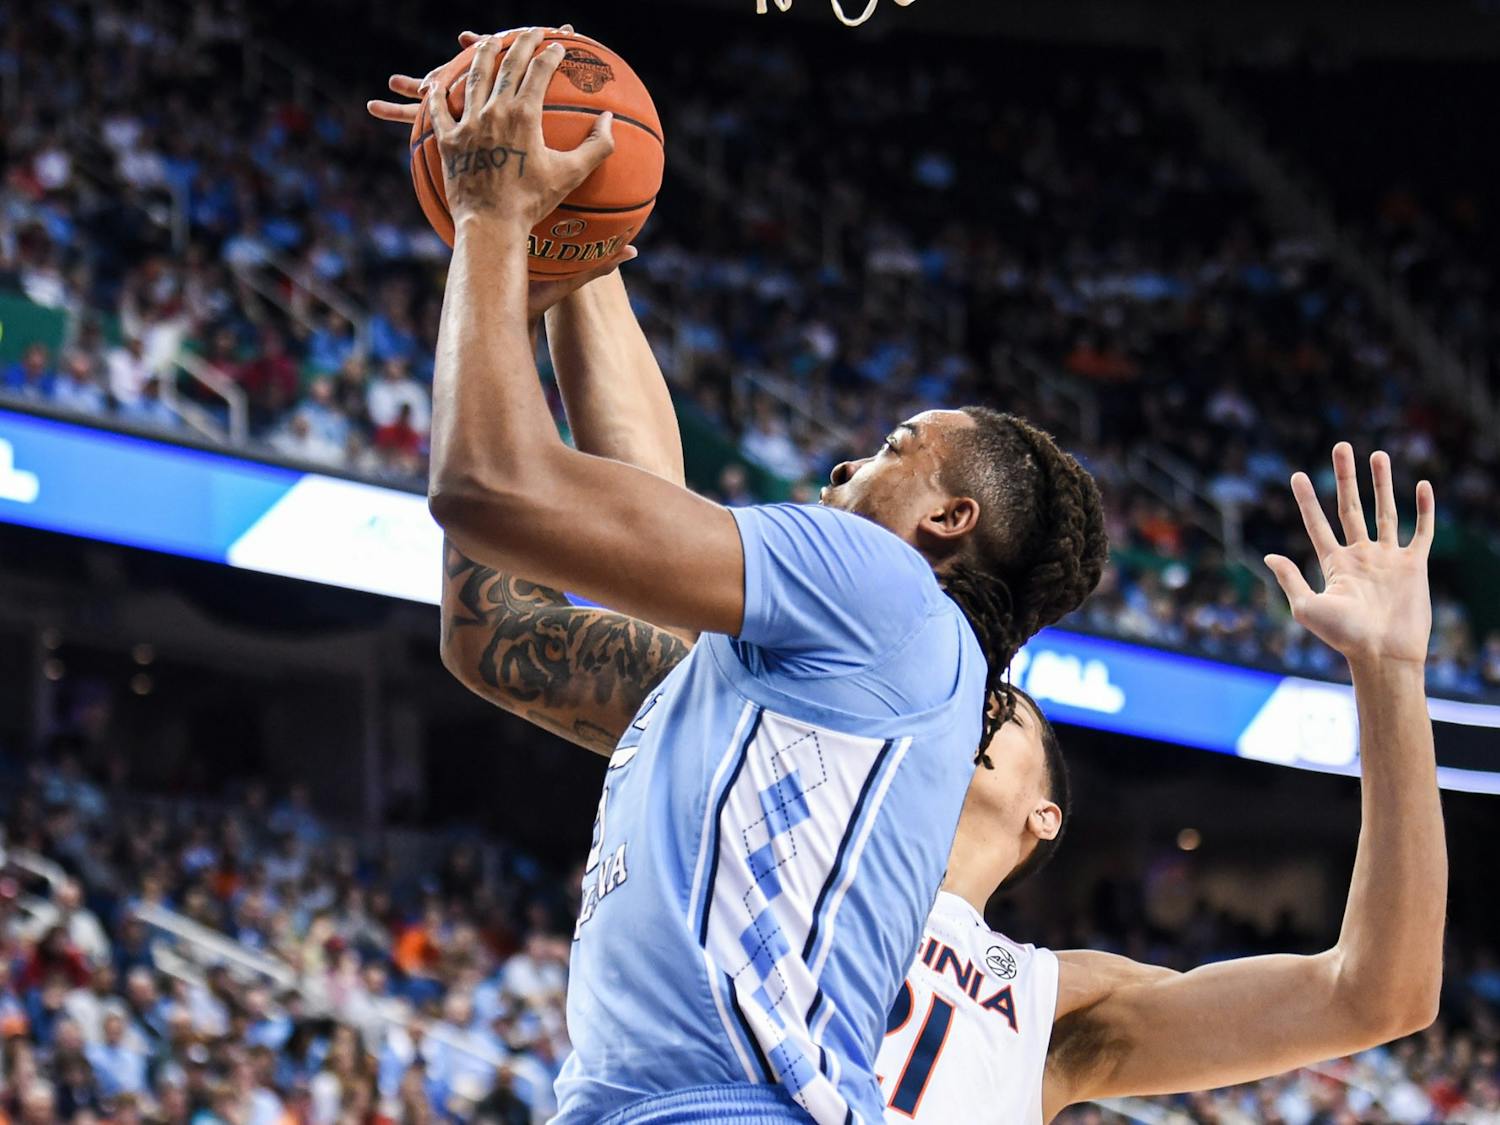 UNC senior forward and center Armando Bacot (5) attempts to score a basket during the game against Virginia in the ACC Tournament Quarterfinals at Greensboro Coliseum on March 9, 2023. UNC fell to Virginia 68-59.